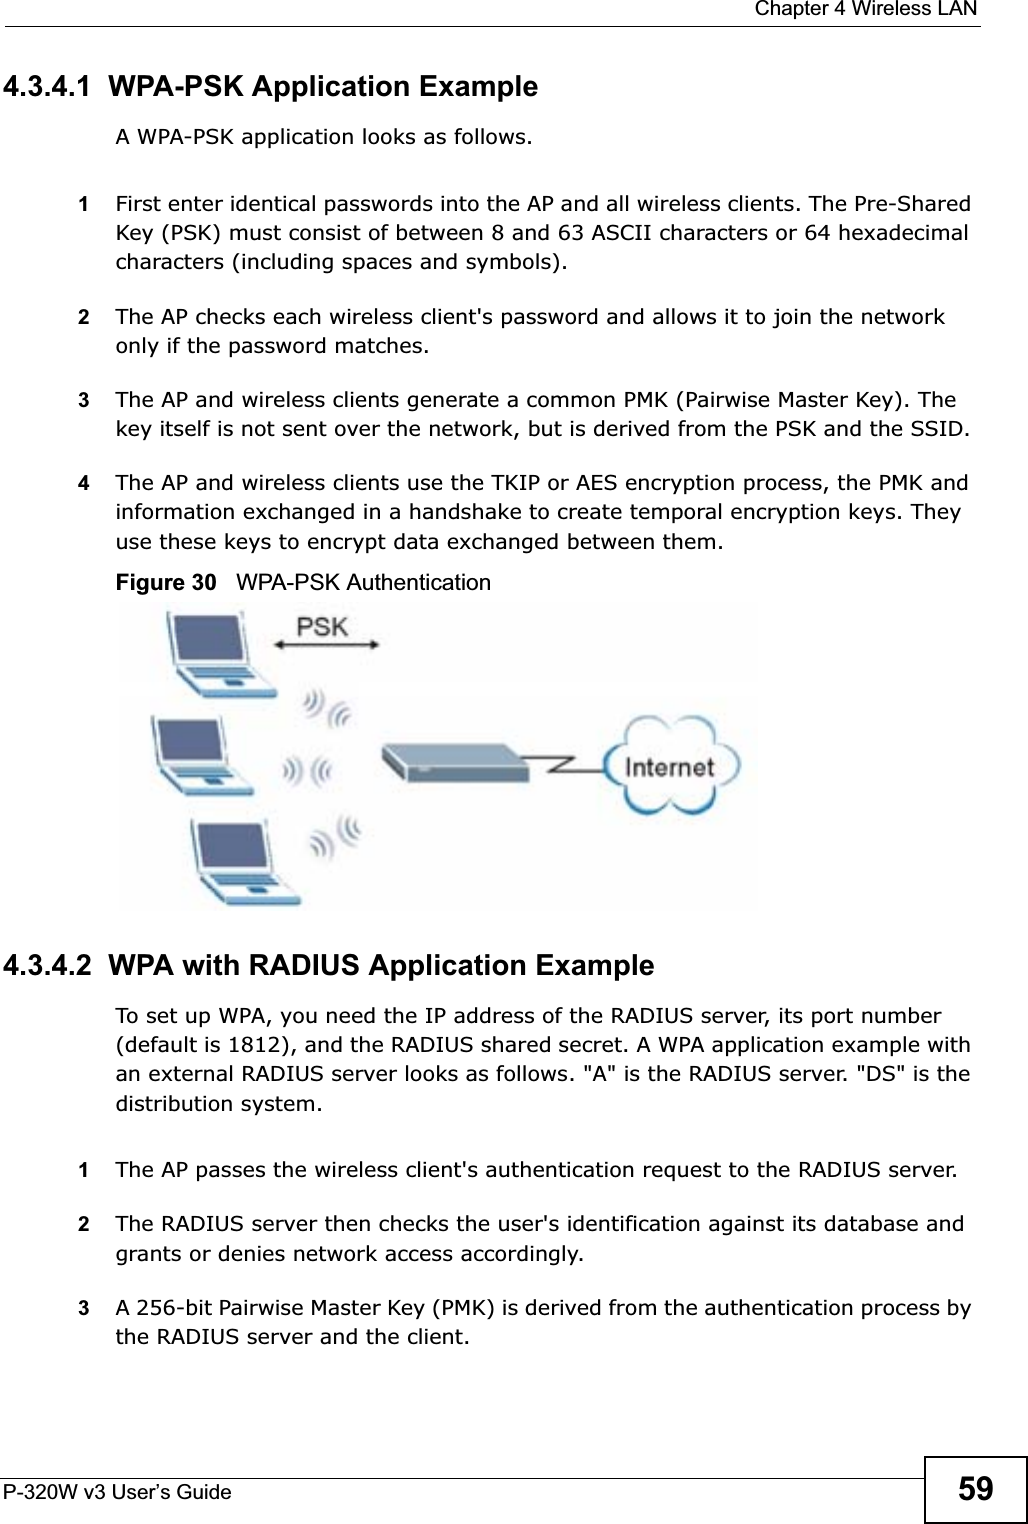  Chapter 4 Wireless LANP-320W v3 User’s Guide 594.3.4.1  WPA-PSK Application ExampleA WPA-PSK application looks as follows.1First enter identical passwords into the AP and all wireless clients. The Pre-Shared Key (PSK) must consist of between 8 and 63 ASCII characters or 64 hexadecimal characters (including spaces and symbols).2The AP checks each wireless client&apos;s password and allows it to join the network only if the password matches.3The AP and wireless clients generate a common PMK (Pairwise Master Key). The key itself is not sent over the network, but is derived from the PSK and the SSID. 4The AP and wireless clients use the TKIP or AES encryption process, the PMK and information exchanged in a handshake to create temporal encryption keys. They use these keys to encrypt data exchanged between them.Figure 30   WPA-PSK Authentication4.3.4.2  WPA with RADIUS Application ExampleTo set up WPA, you need the IP address of the RADIUS server, its port number (default is 1812), and the RADIUS shared secret. A WPA application example with an external RADIUS server looks as follows. &quot;A&quot; is the RADIUS server. &quot;DS&quot; is the distribution system.1The AP passes the wireless client&apos;s authentication request to the RADIUS server.2The RADIUS server then checks the user&apos;s identification against its database and grants or denies network access accordingly.3A 256-bit Pairwise Master Key (PMK) is derived from the authentication process by the RADIUS server and the client.